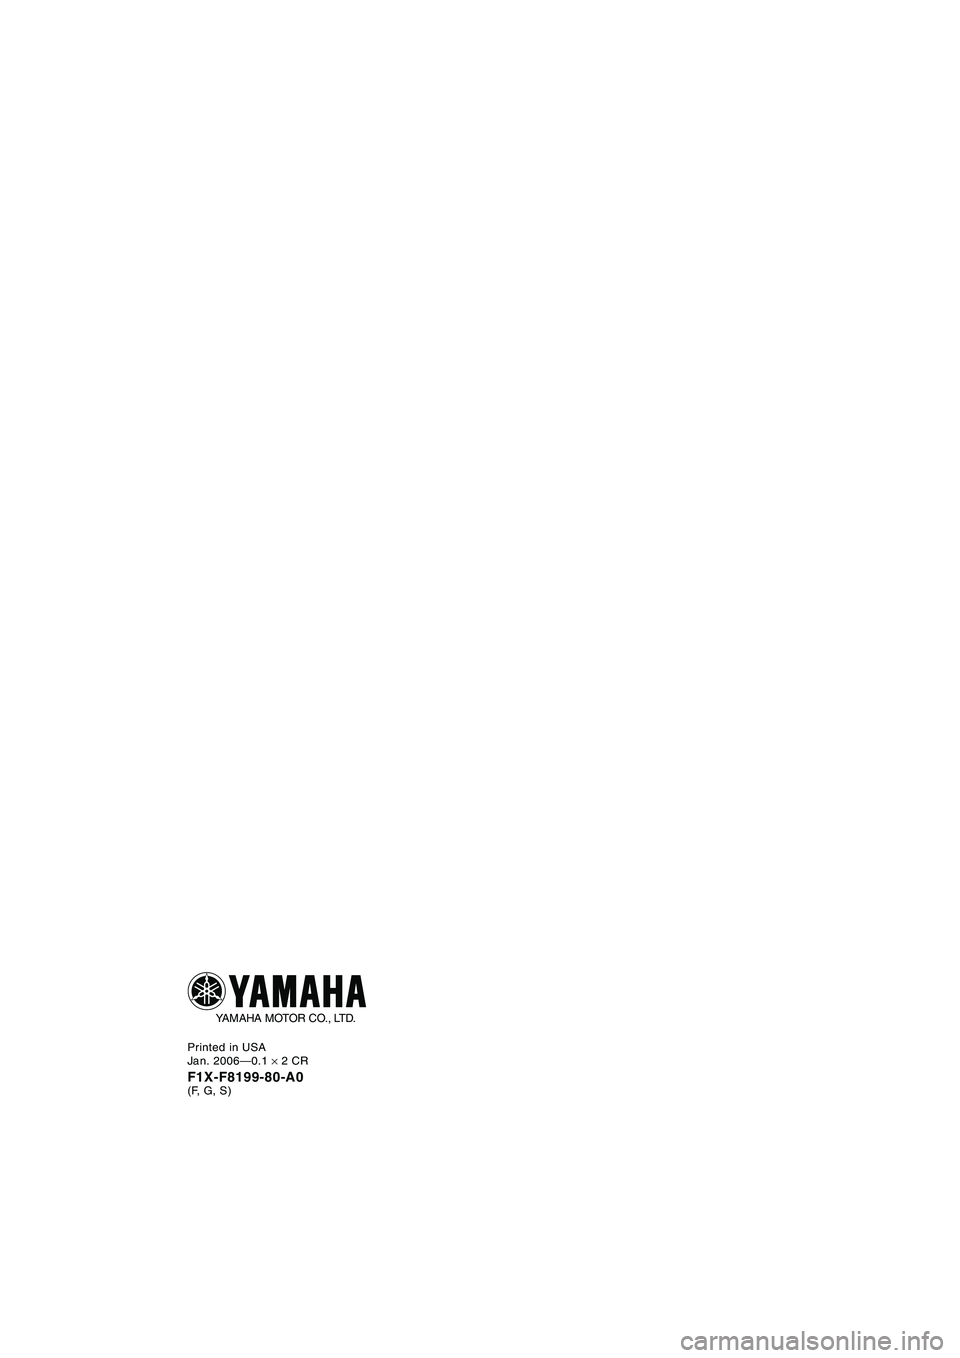 YAMAHA FX HO 2006  Notices Demploi (in French) Printed in USA
Jan. 2006—0.1 × 2 CR
F1X-F8199-80-A0(F, G, S)
YAMAHA MOTOR CO., LTD.
U-WC_Cover4_F1X_80-A.fm  Page 1  Tuesday, January 31, 2006  10:35 AM 